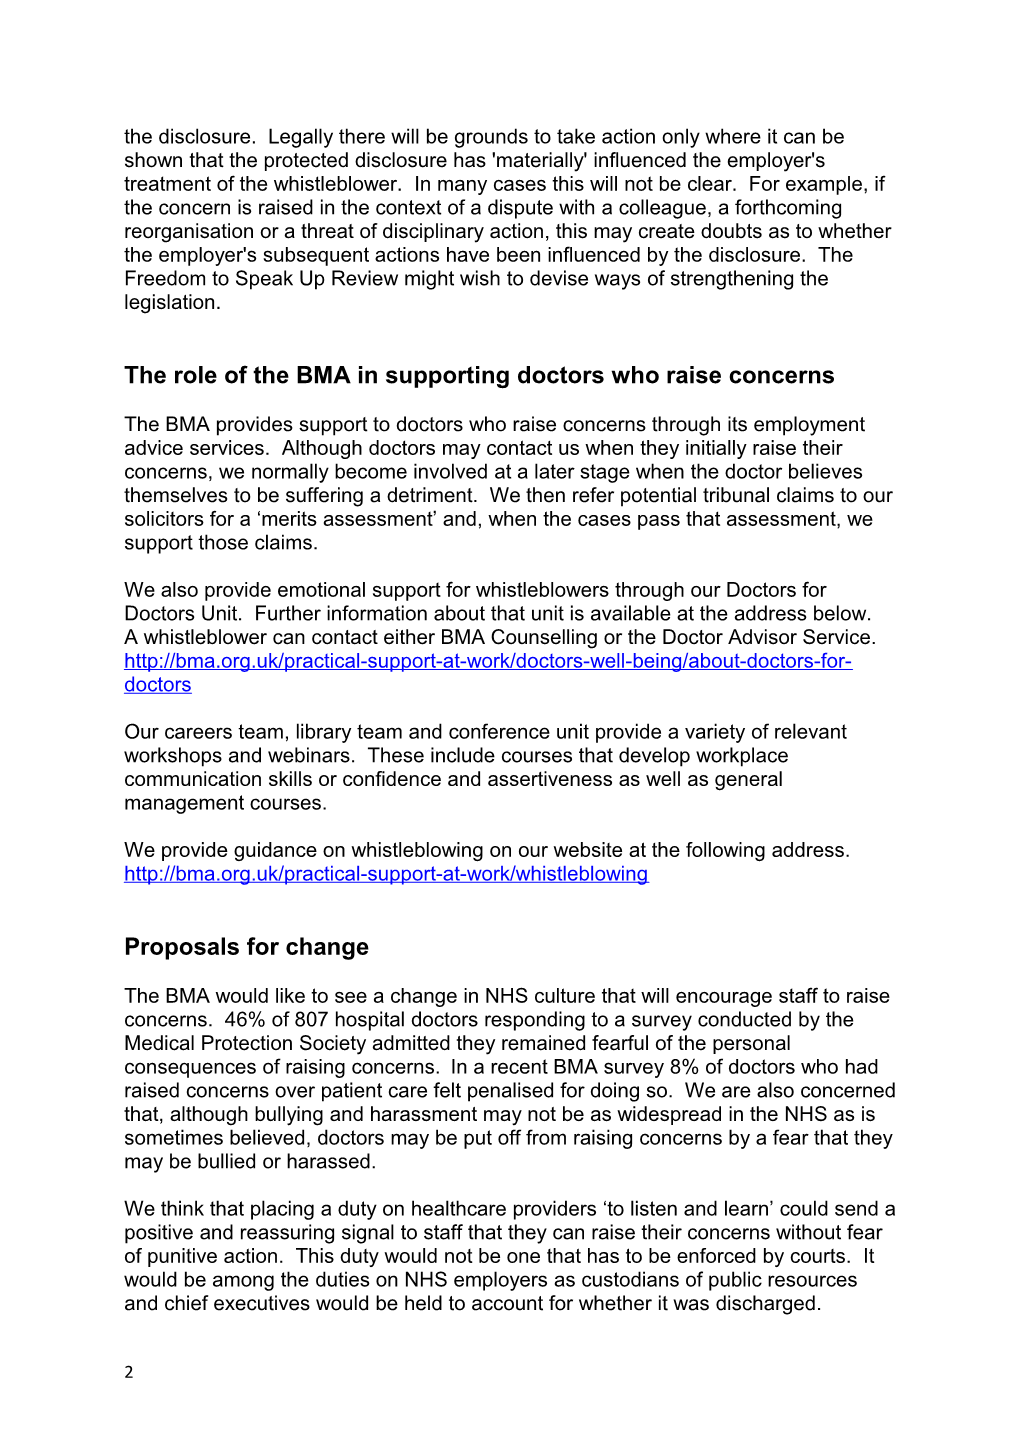 Response from the British Medical Association to the Freedom to Speak up Review